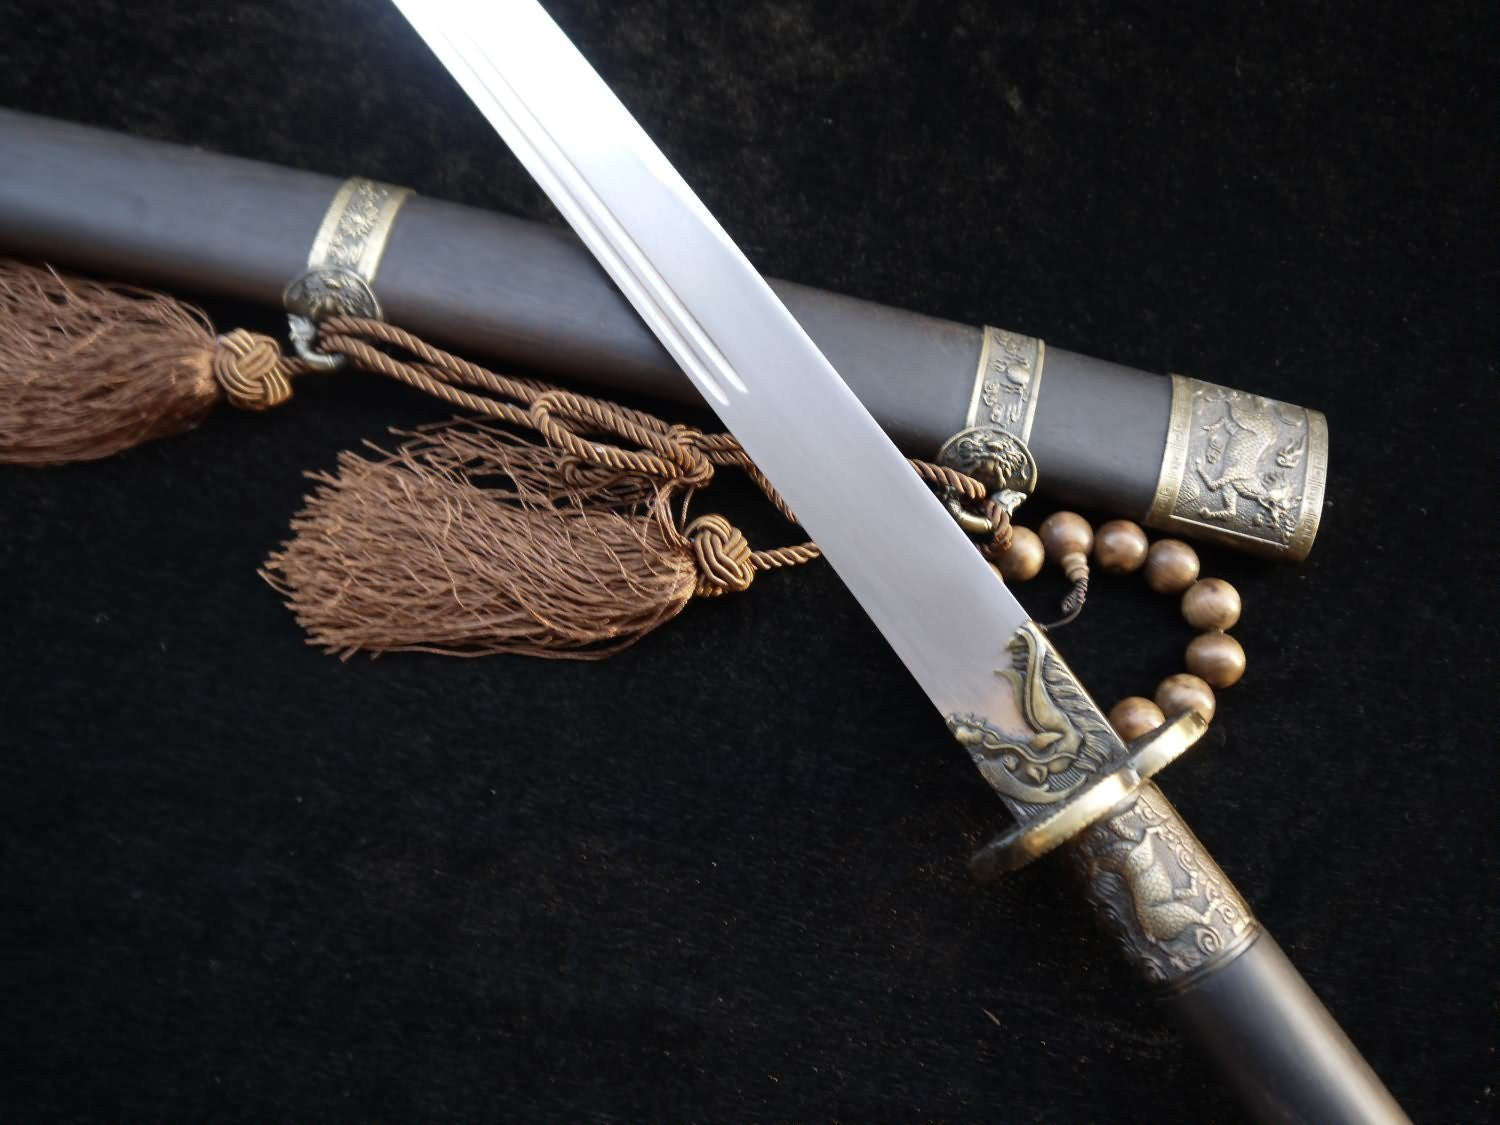 Qing Dynasty broadsword-Damascus steel-Rosewood scabbard-Brass fittings - Chinese sword shop